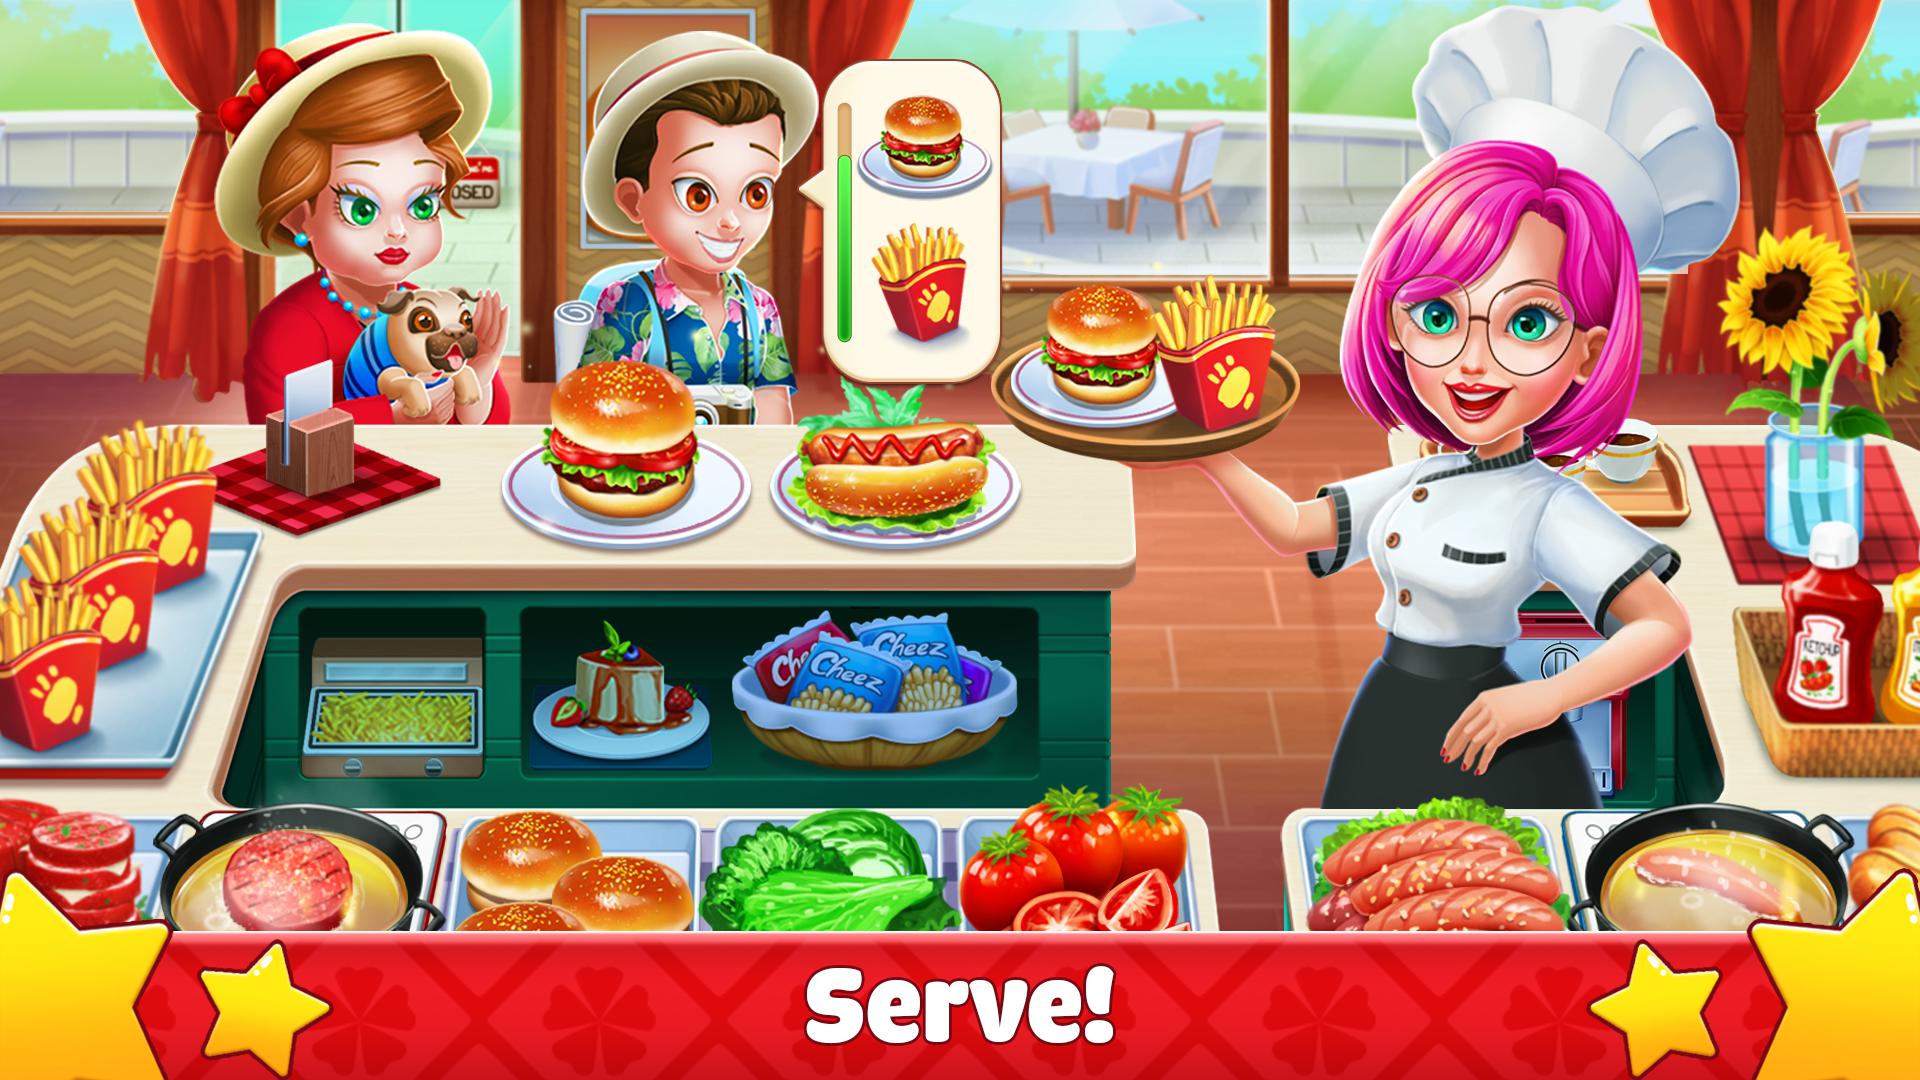 kitchen craze: fever of frenzy city cooking games